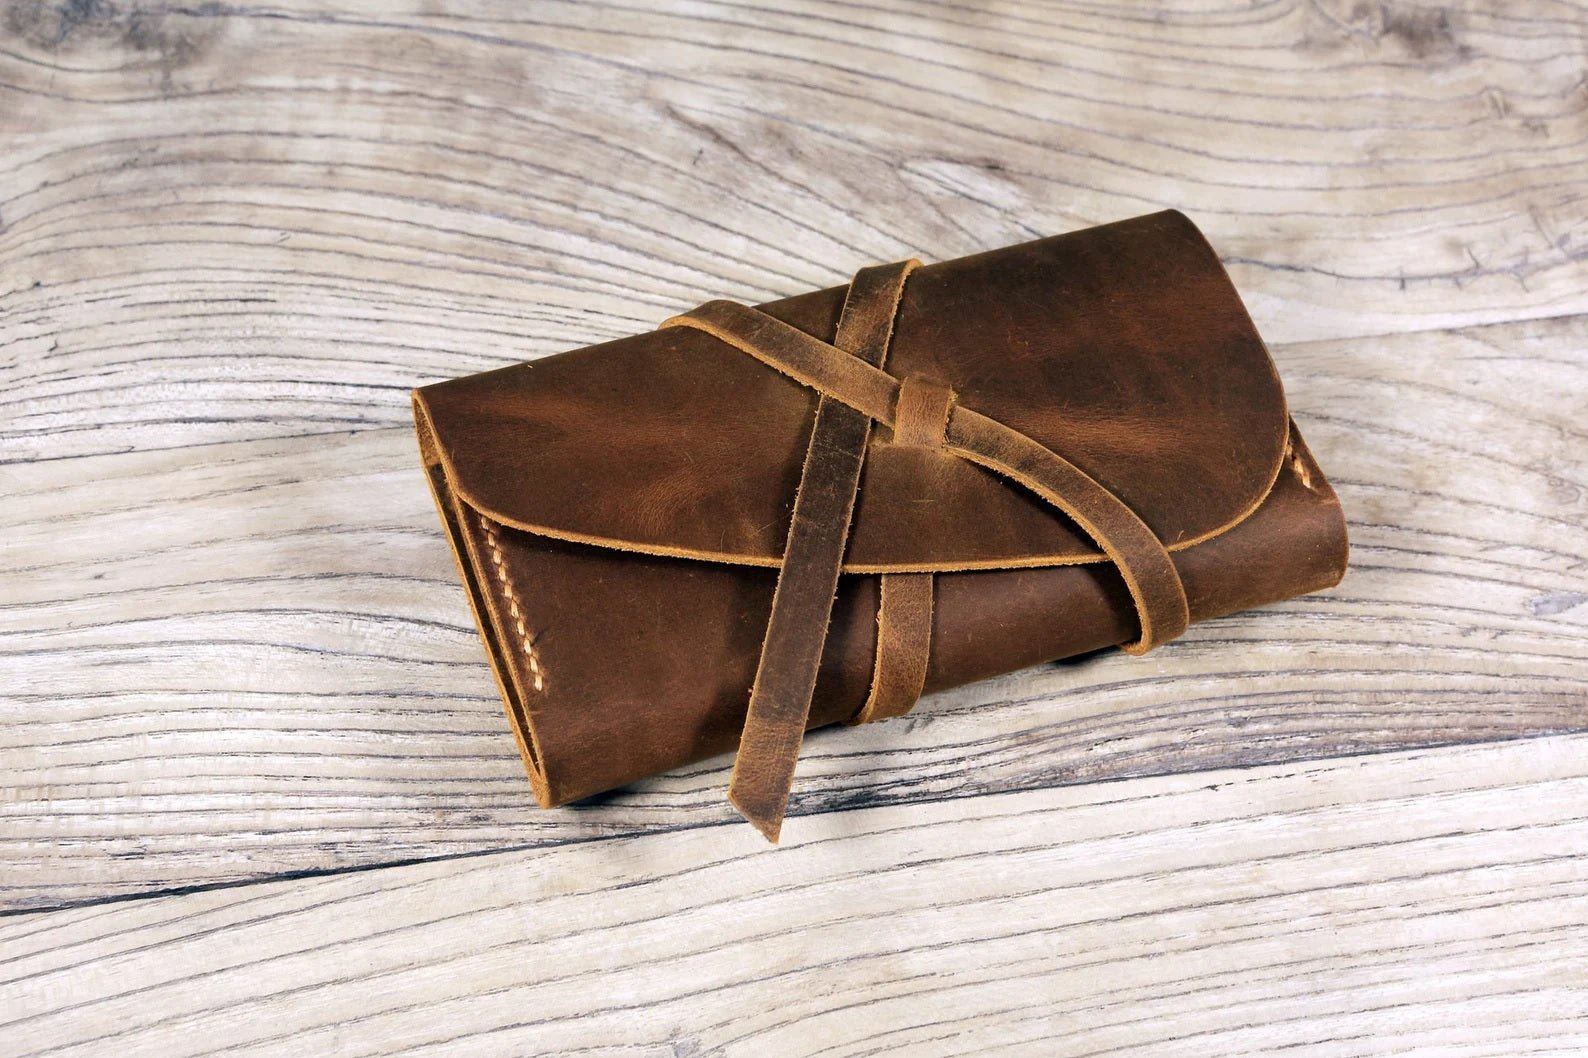 Leather Tobacco Pouch, Personalized Leather Tobacco Case, Engraved